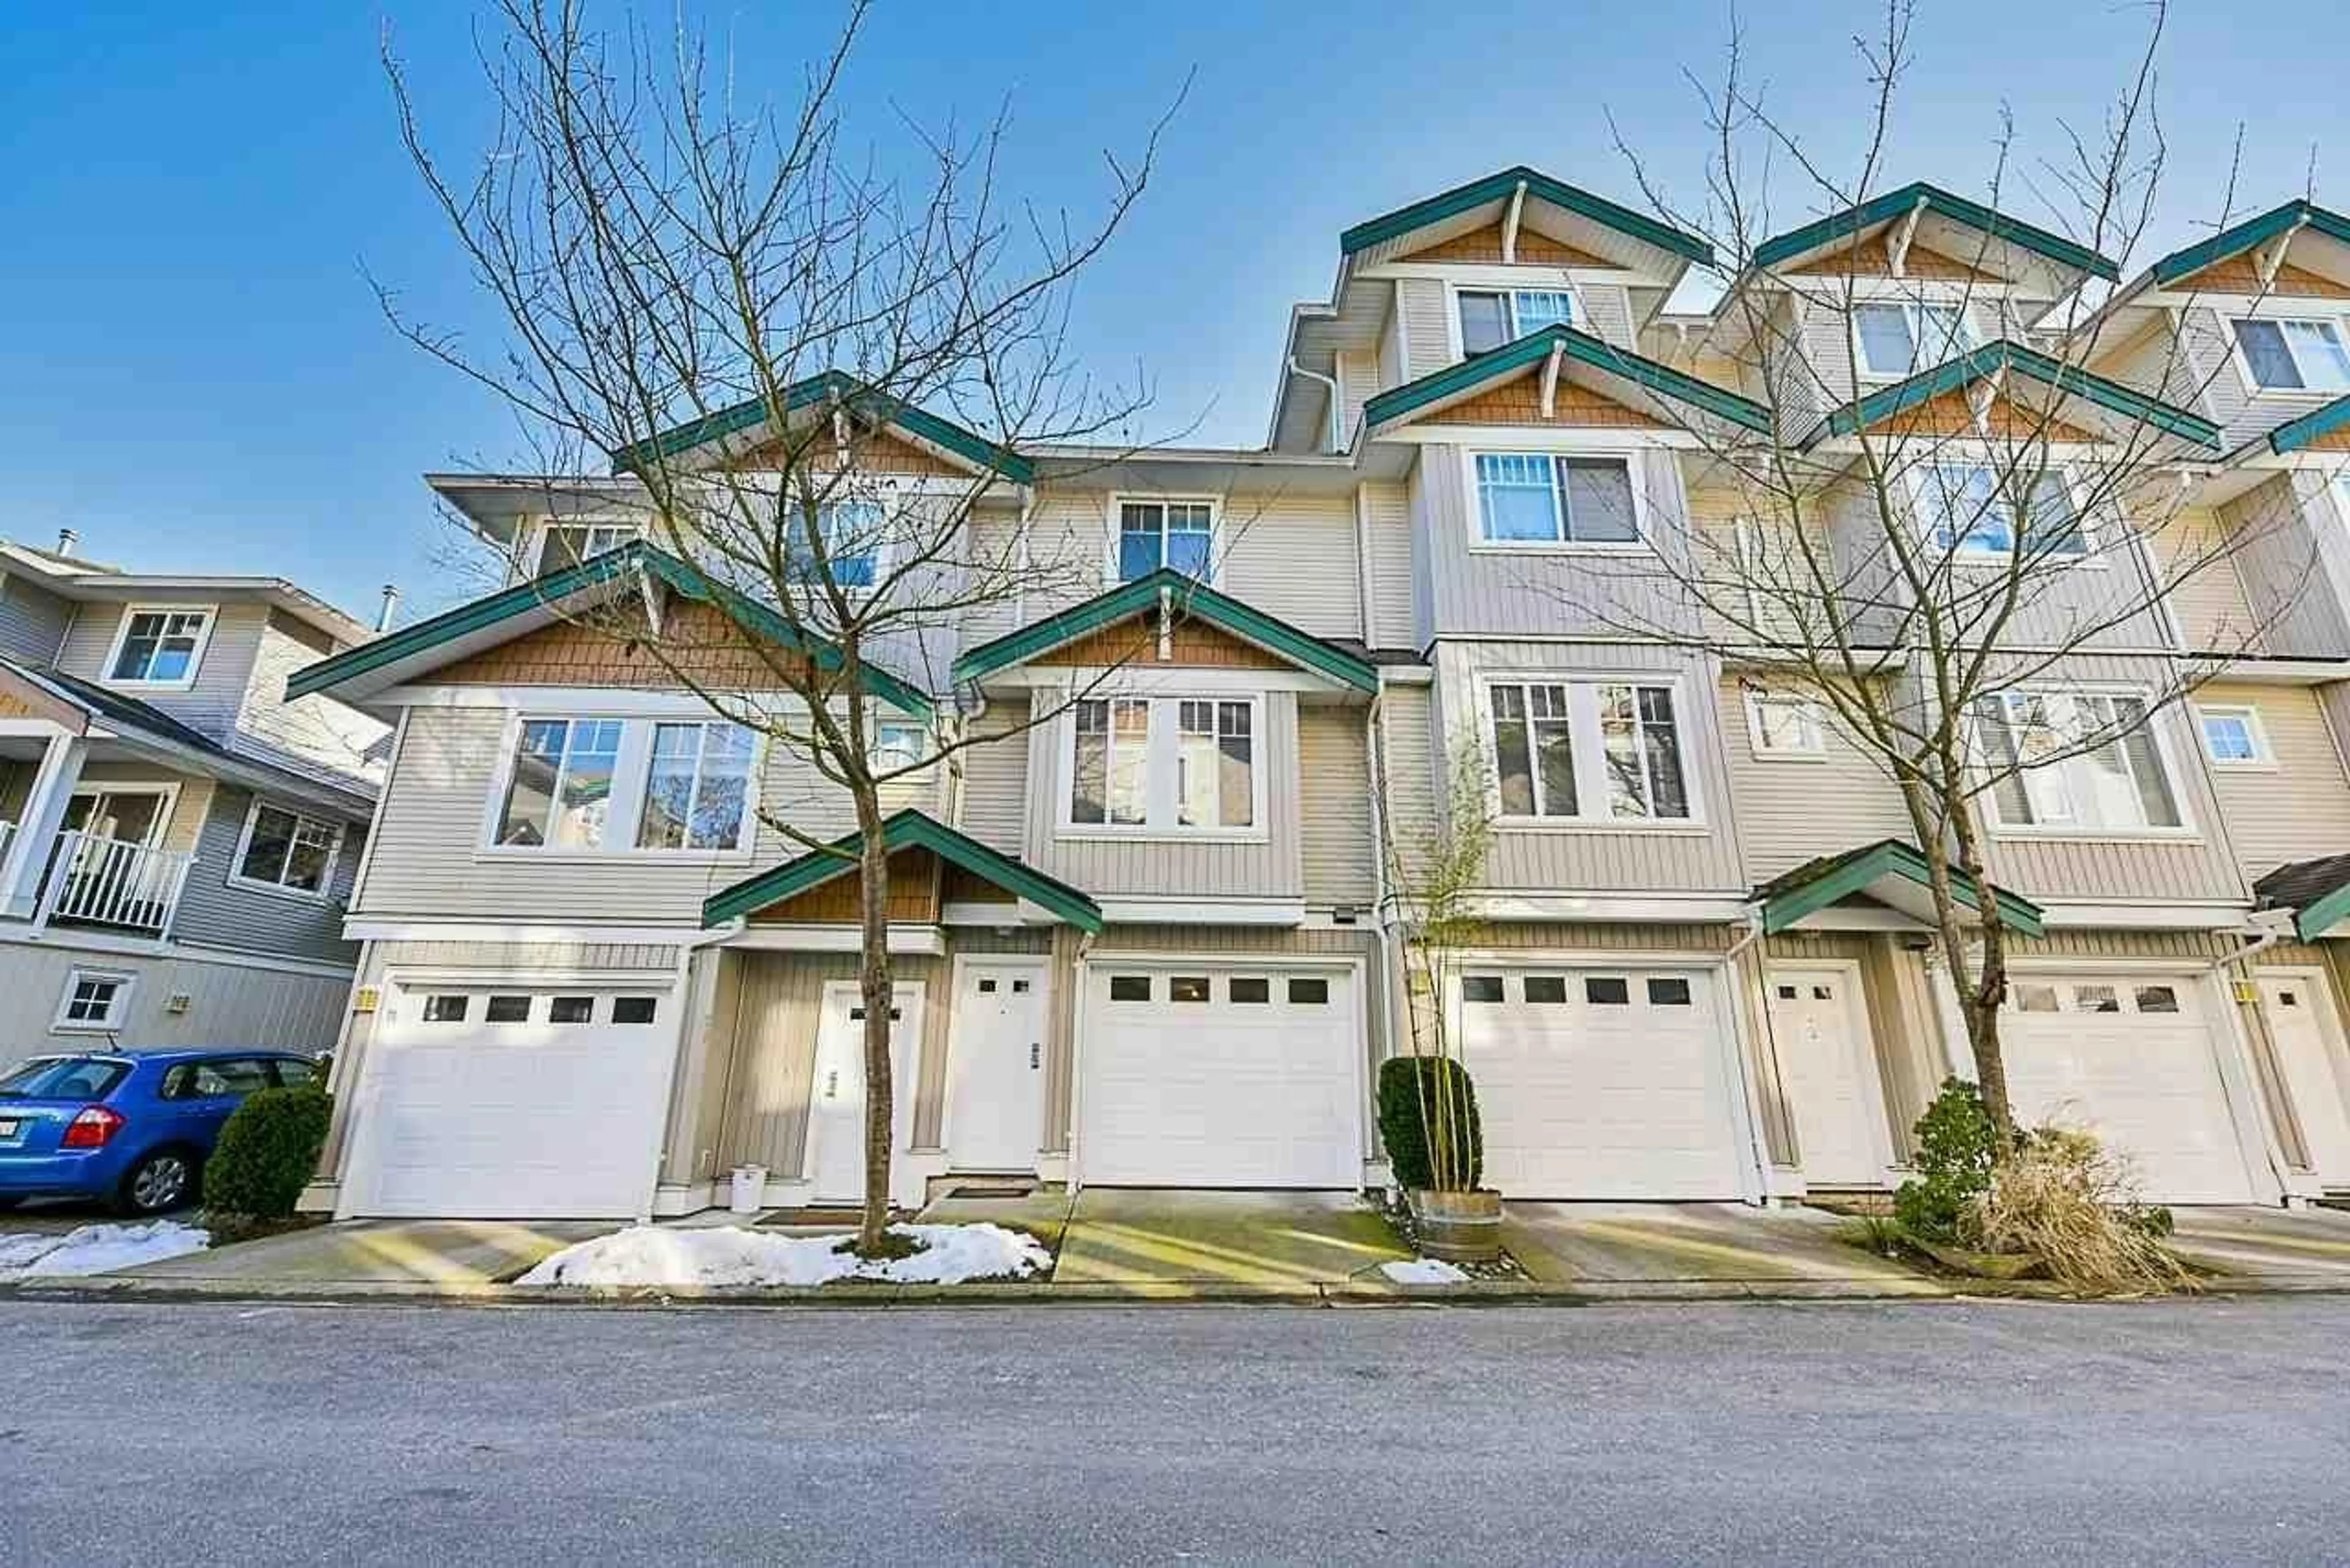 A pic from exterior of the house or condo for 70 12711 64 AVENUE, Surrey British Columbia V3W1X1